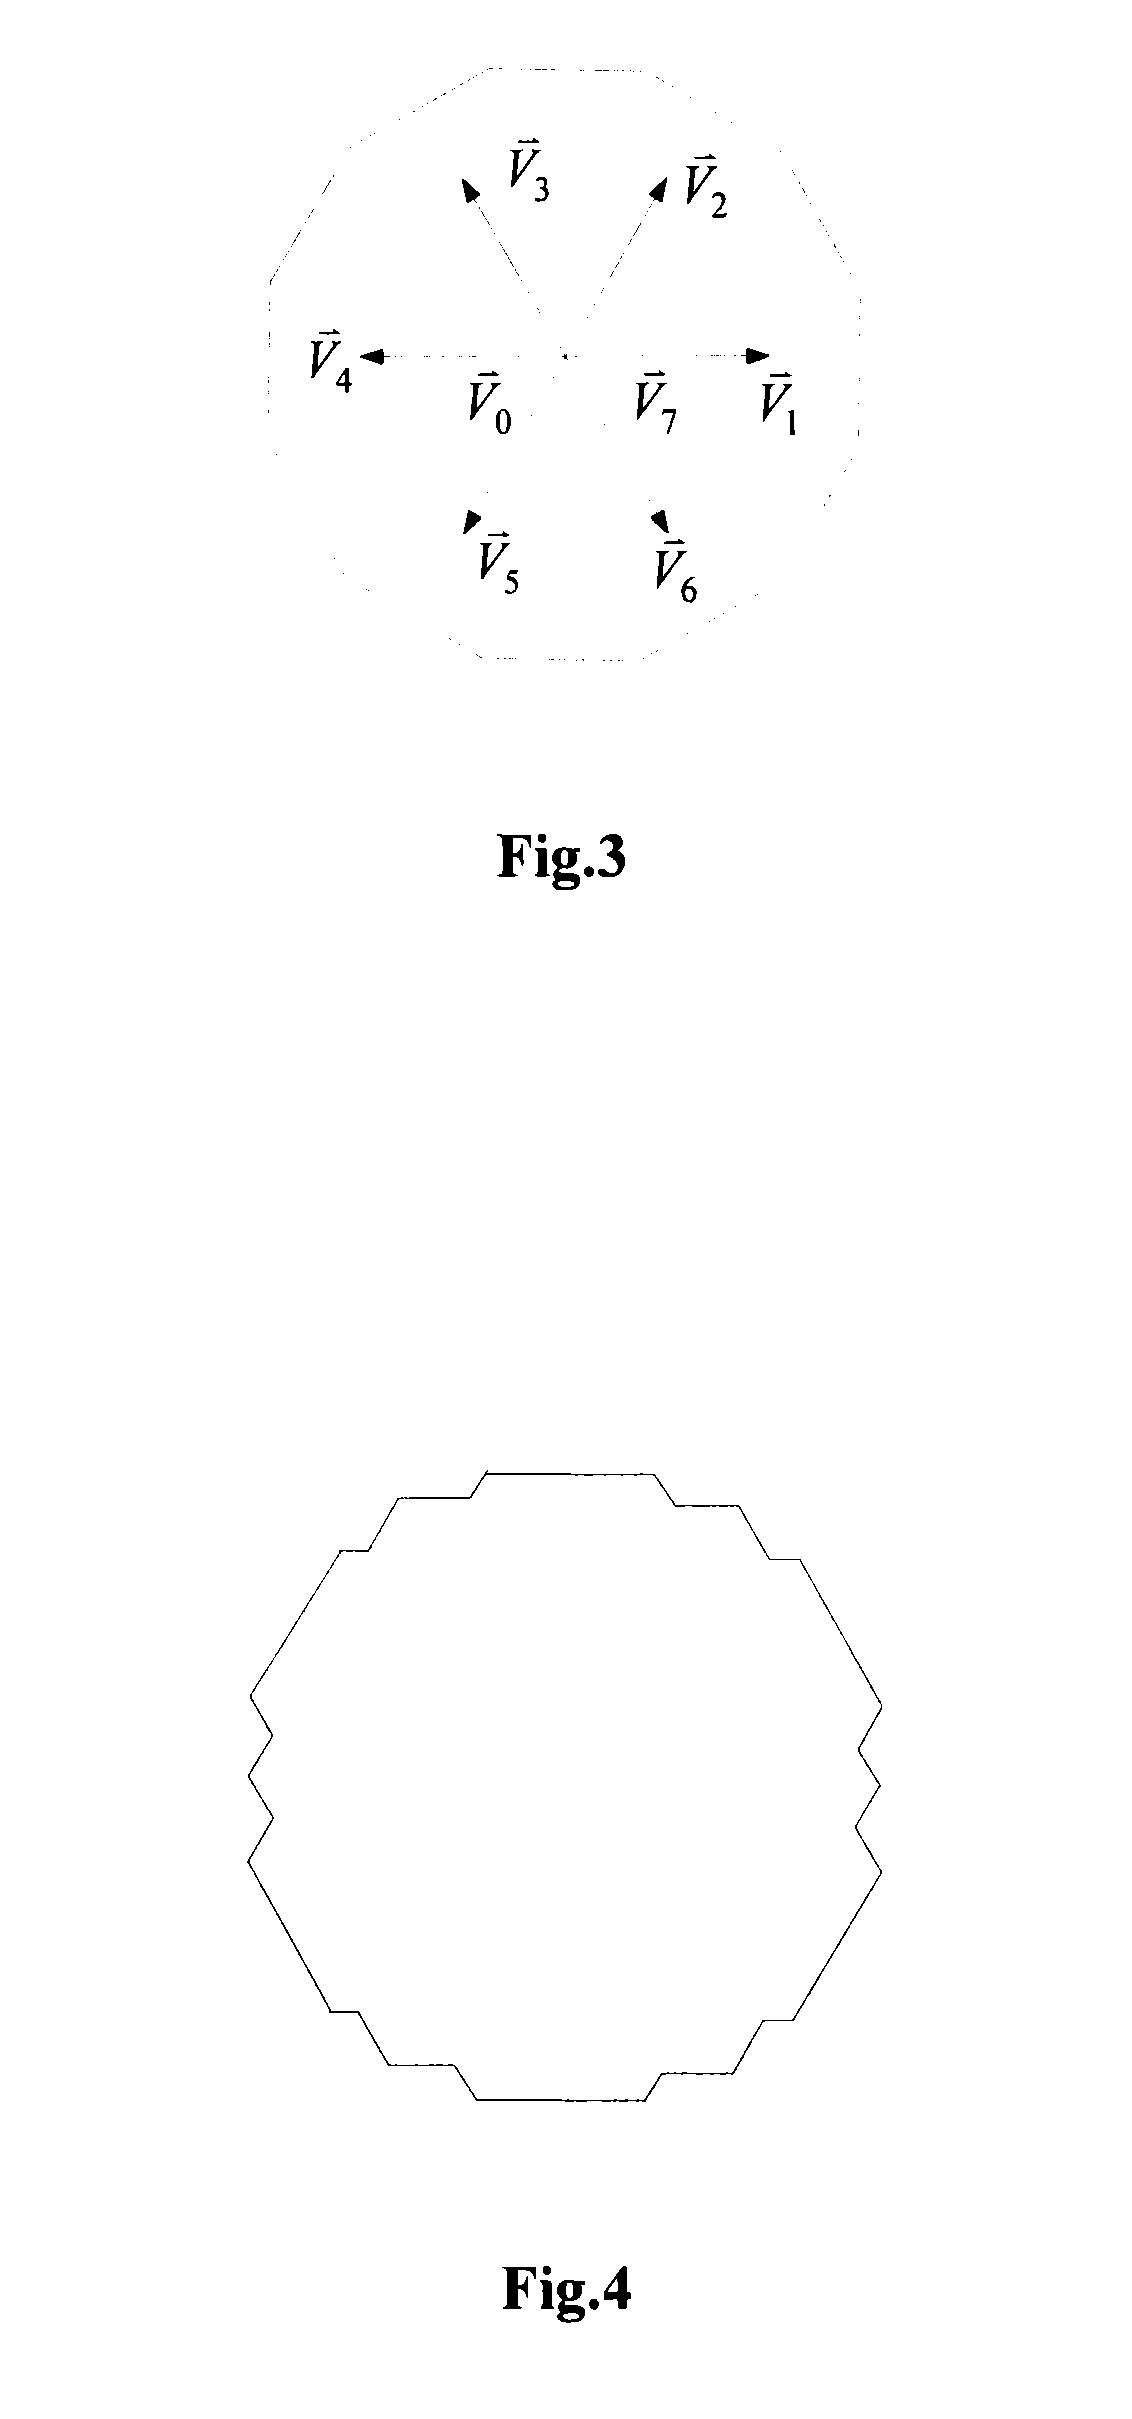 Space vector based synchronous modulating method and system